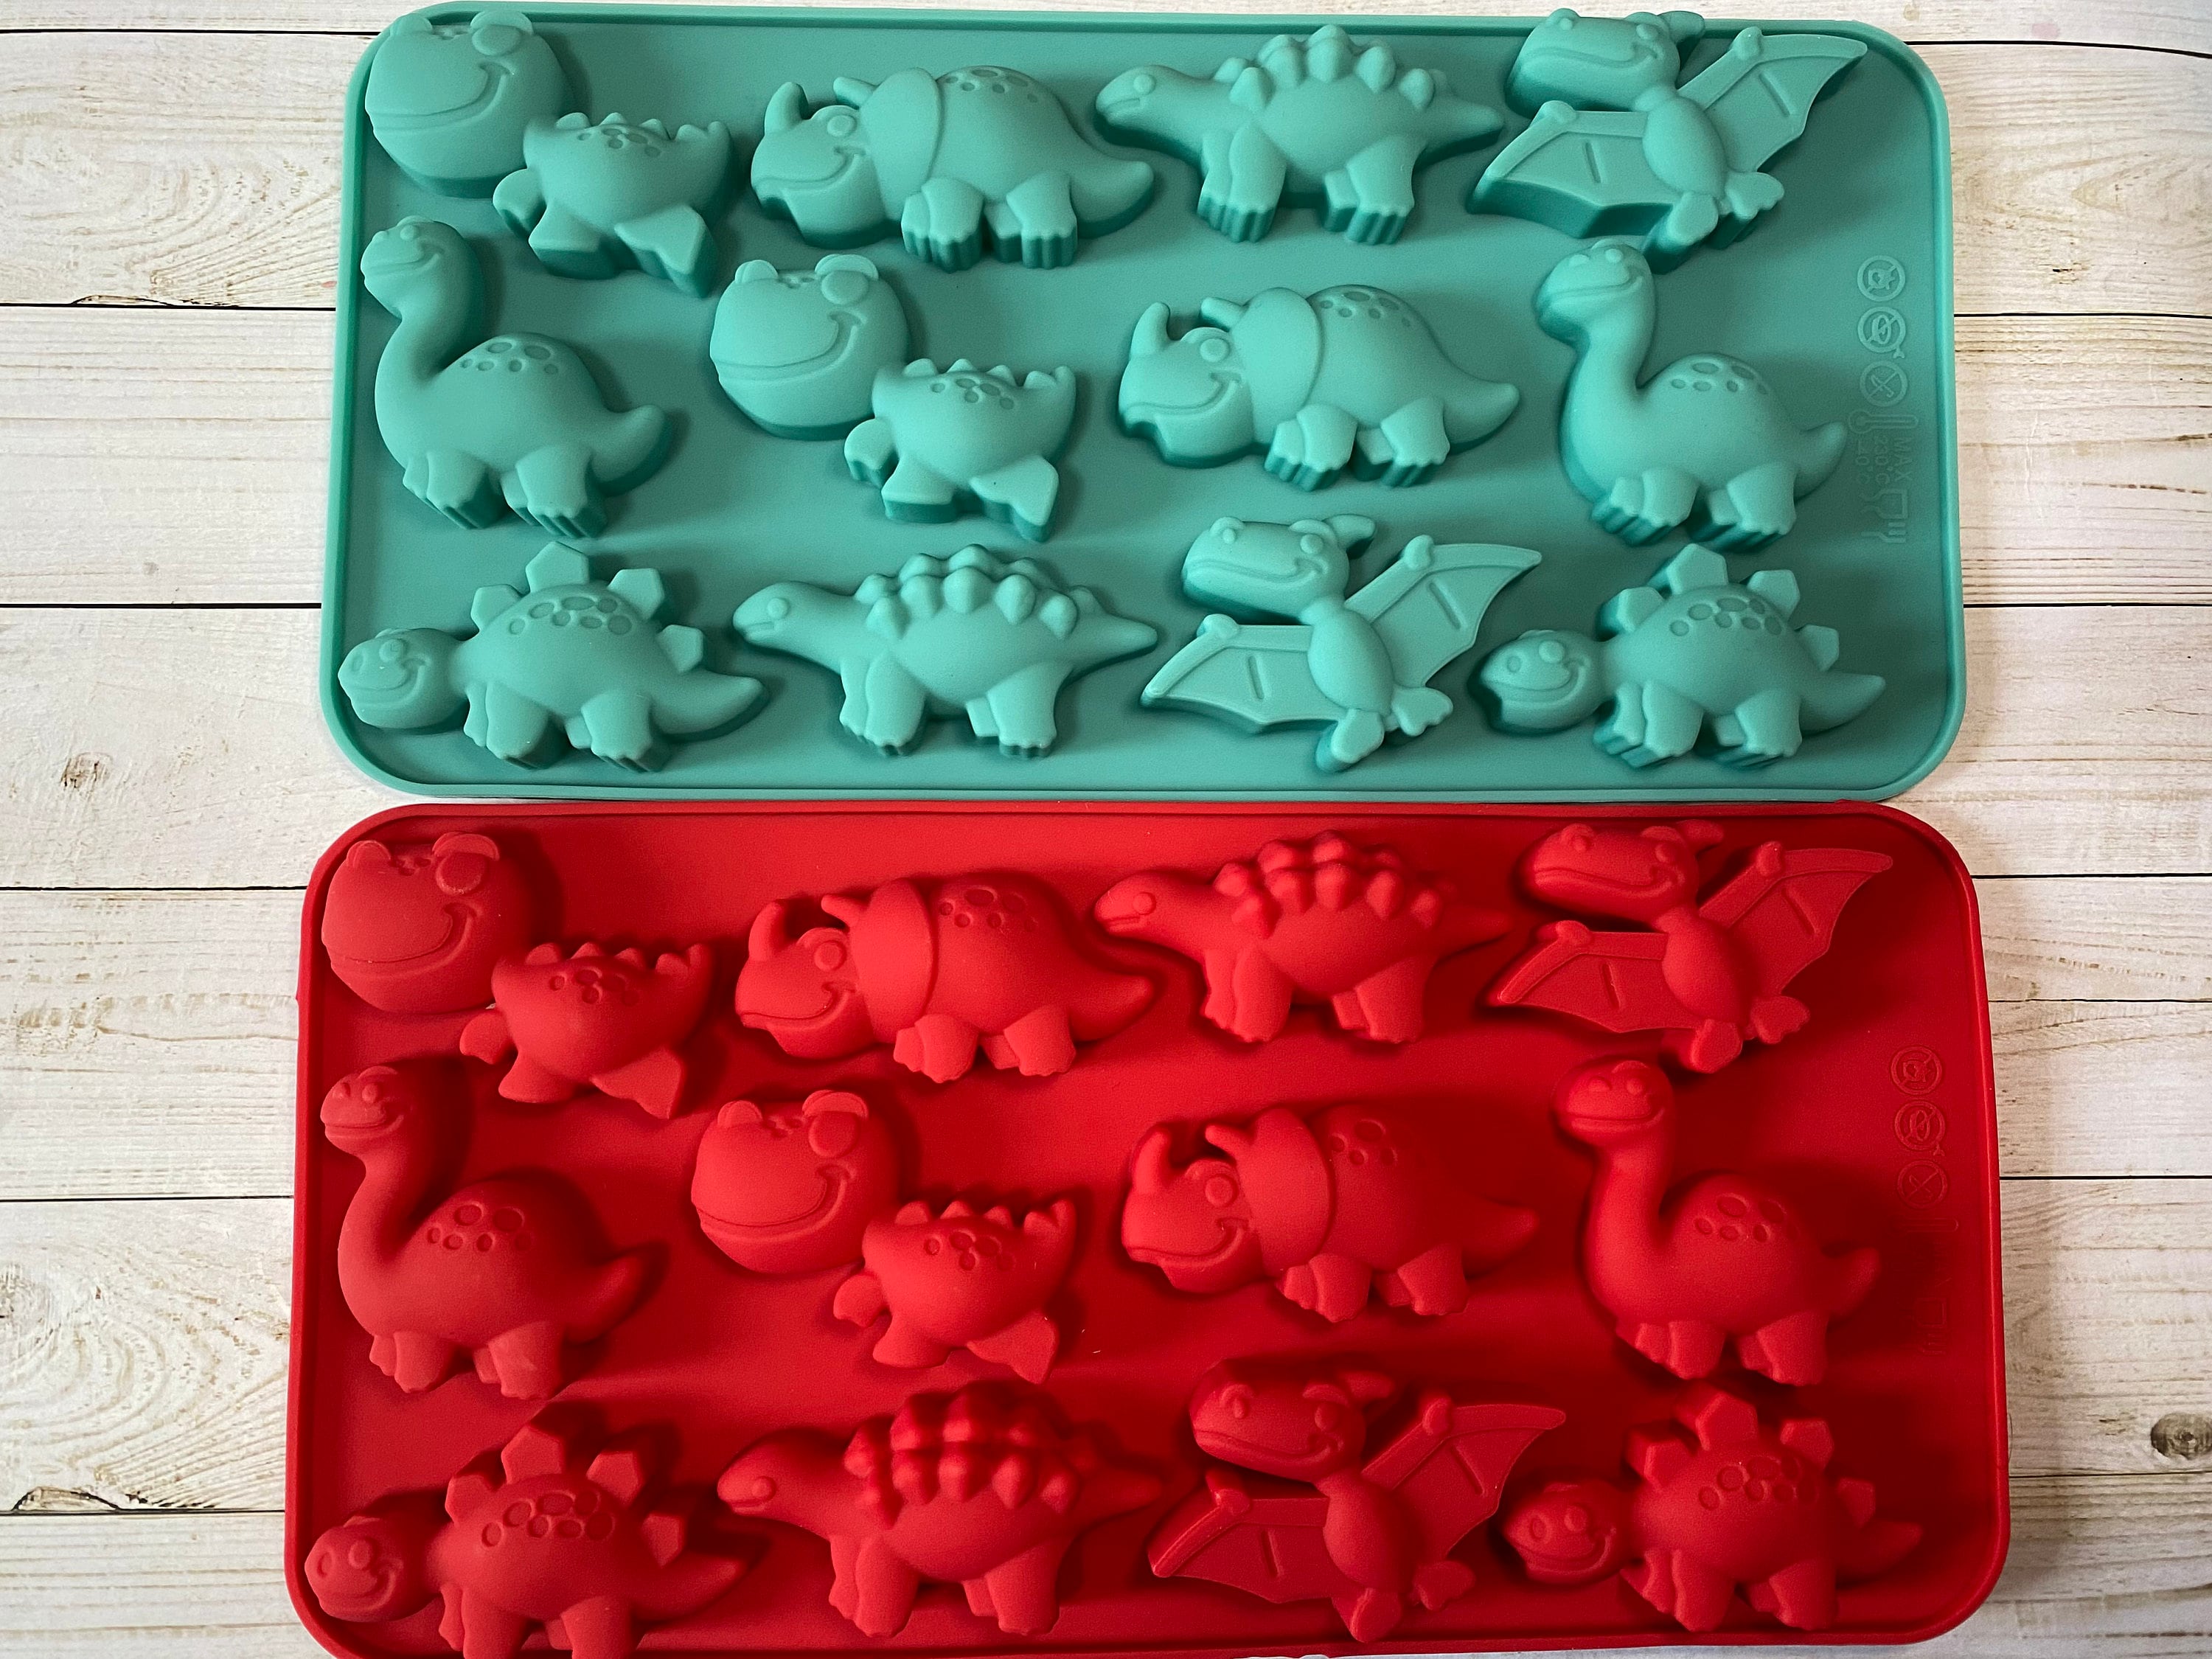 48 Cavity Dinosaur Silicone Molds Gummy Jelly Candy Chocolate Mold Ice Cube Tray  Mould Fondant Cake Decorating Tools